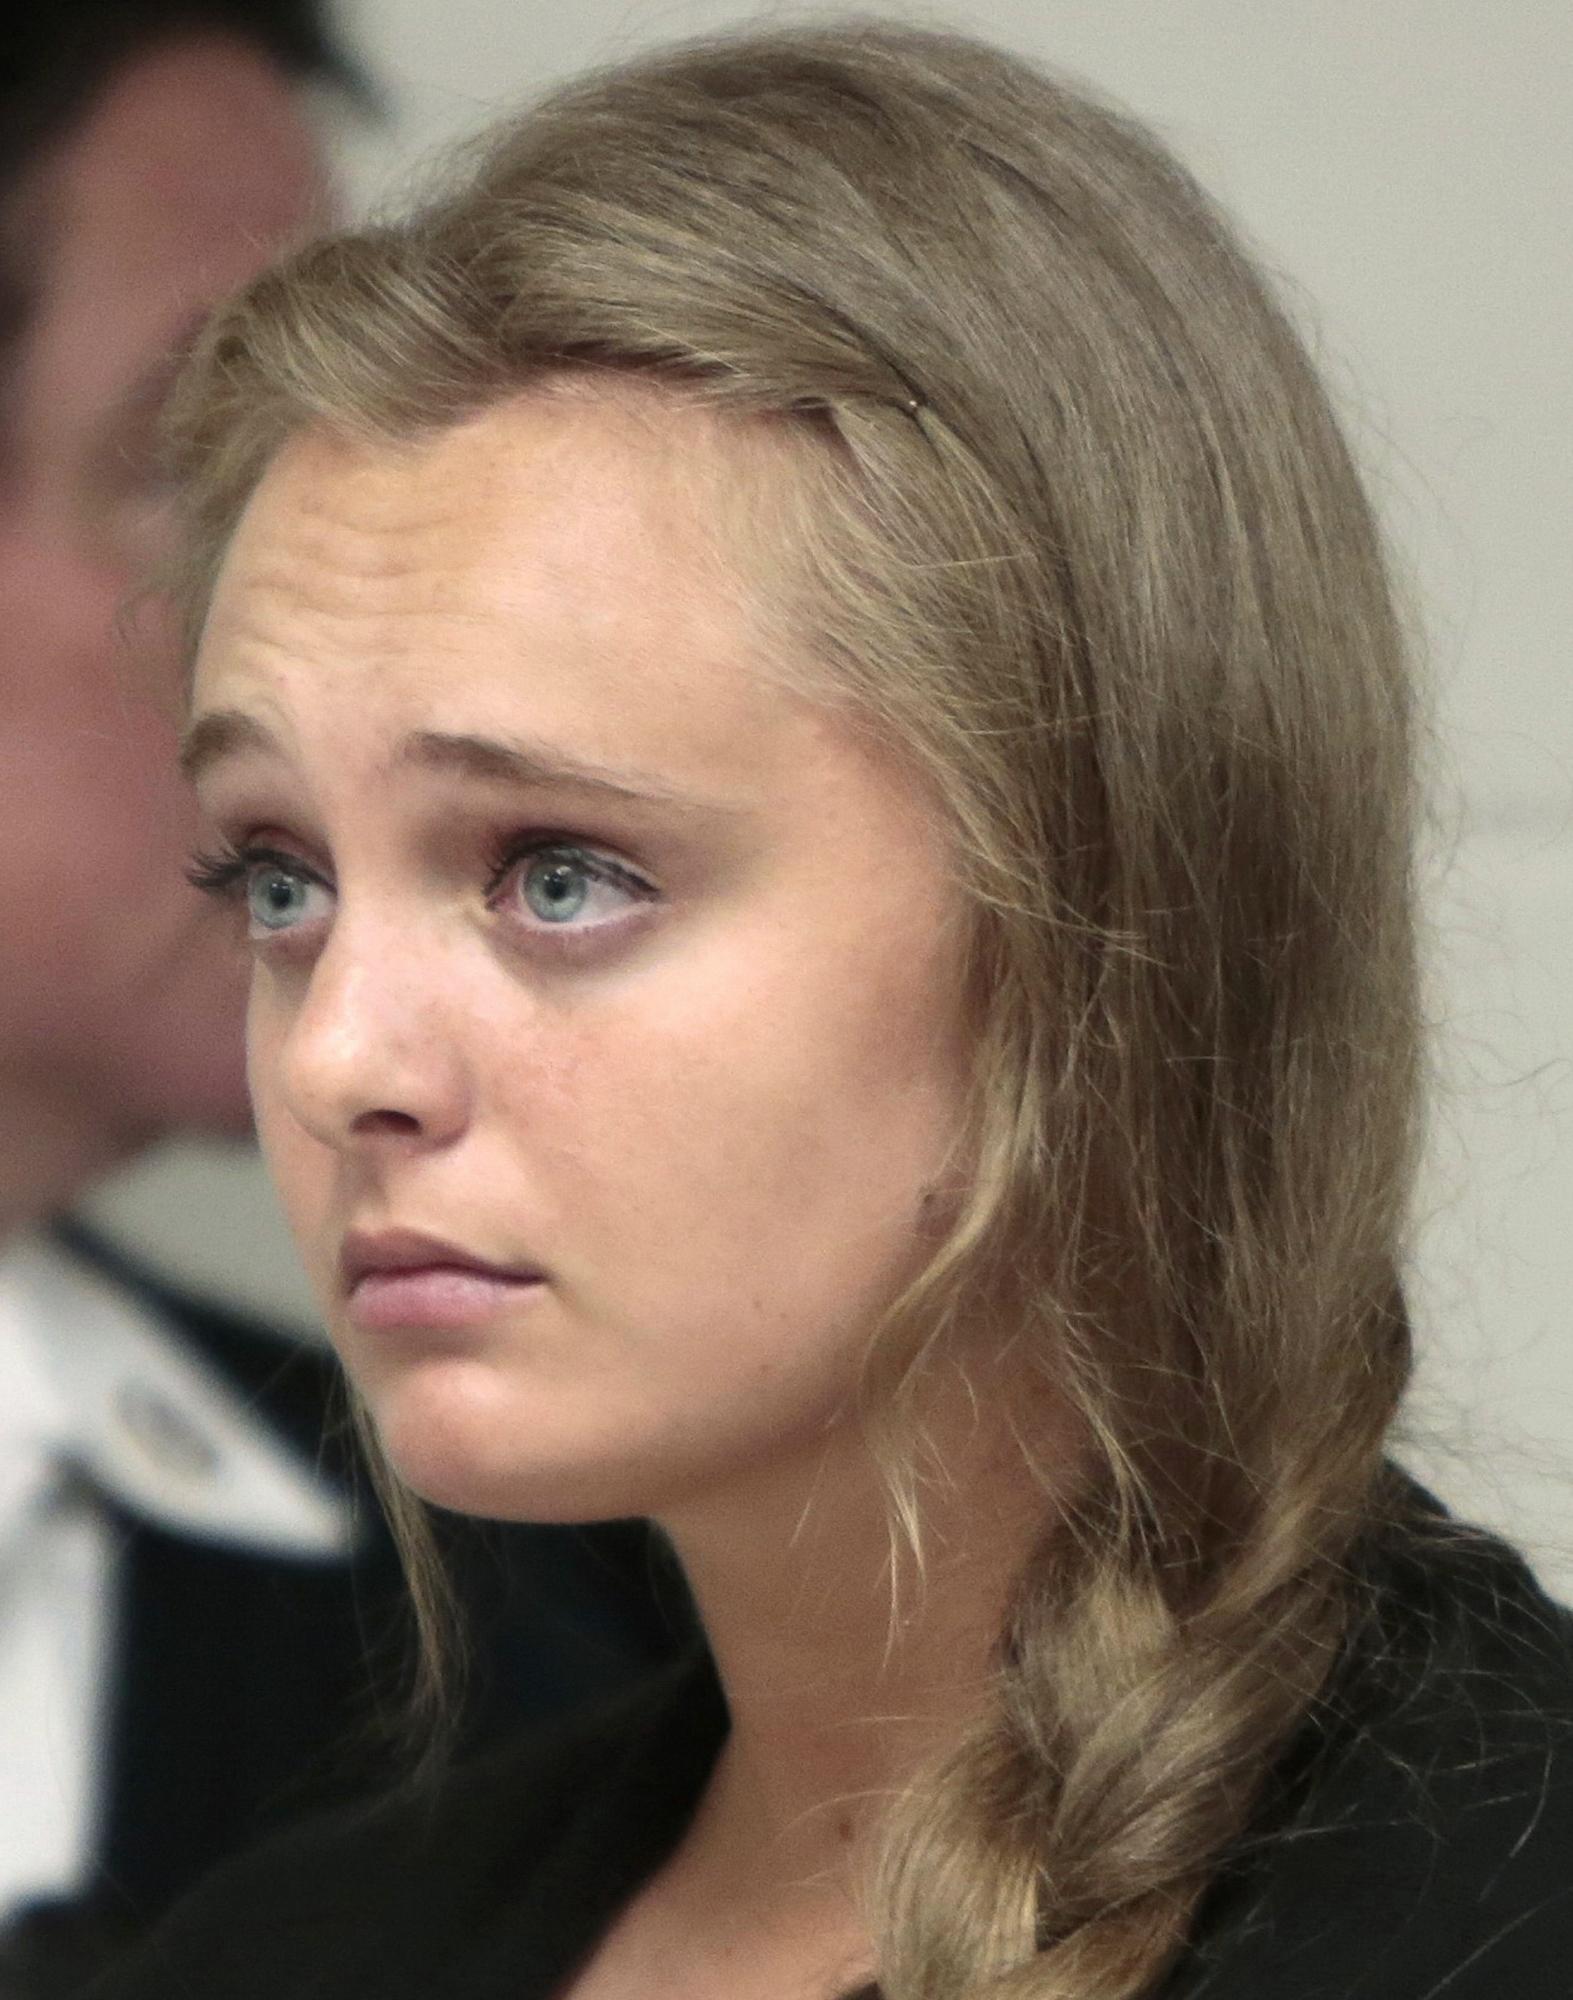 Girl who texted boyfriend urging suicide will face trial | The Spokesman-Review1573 x 2000